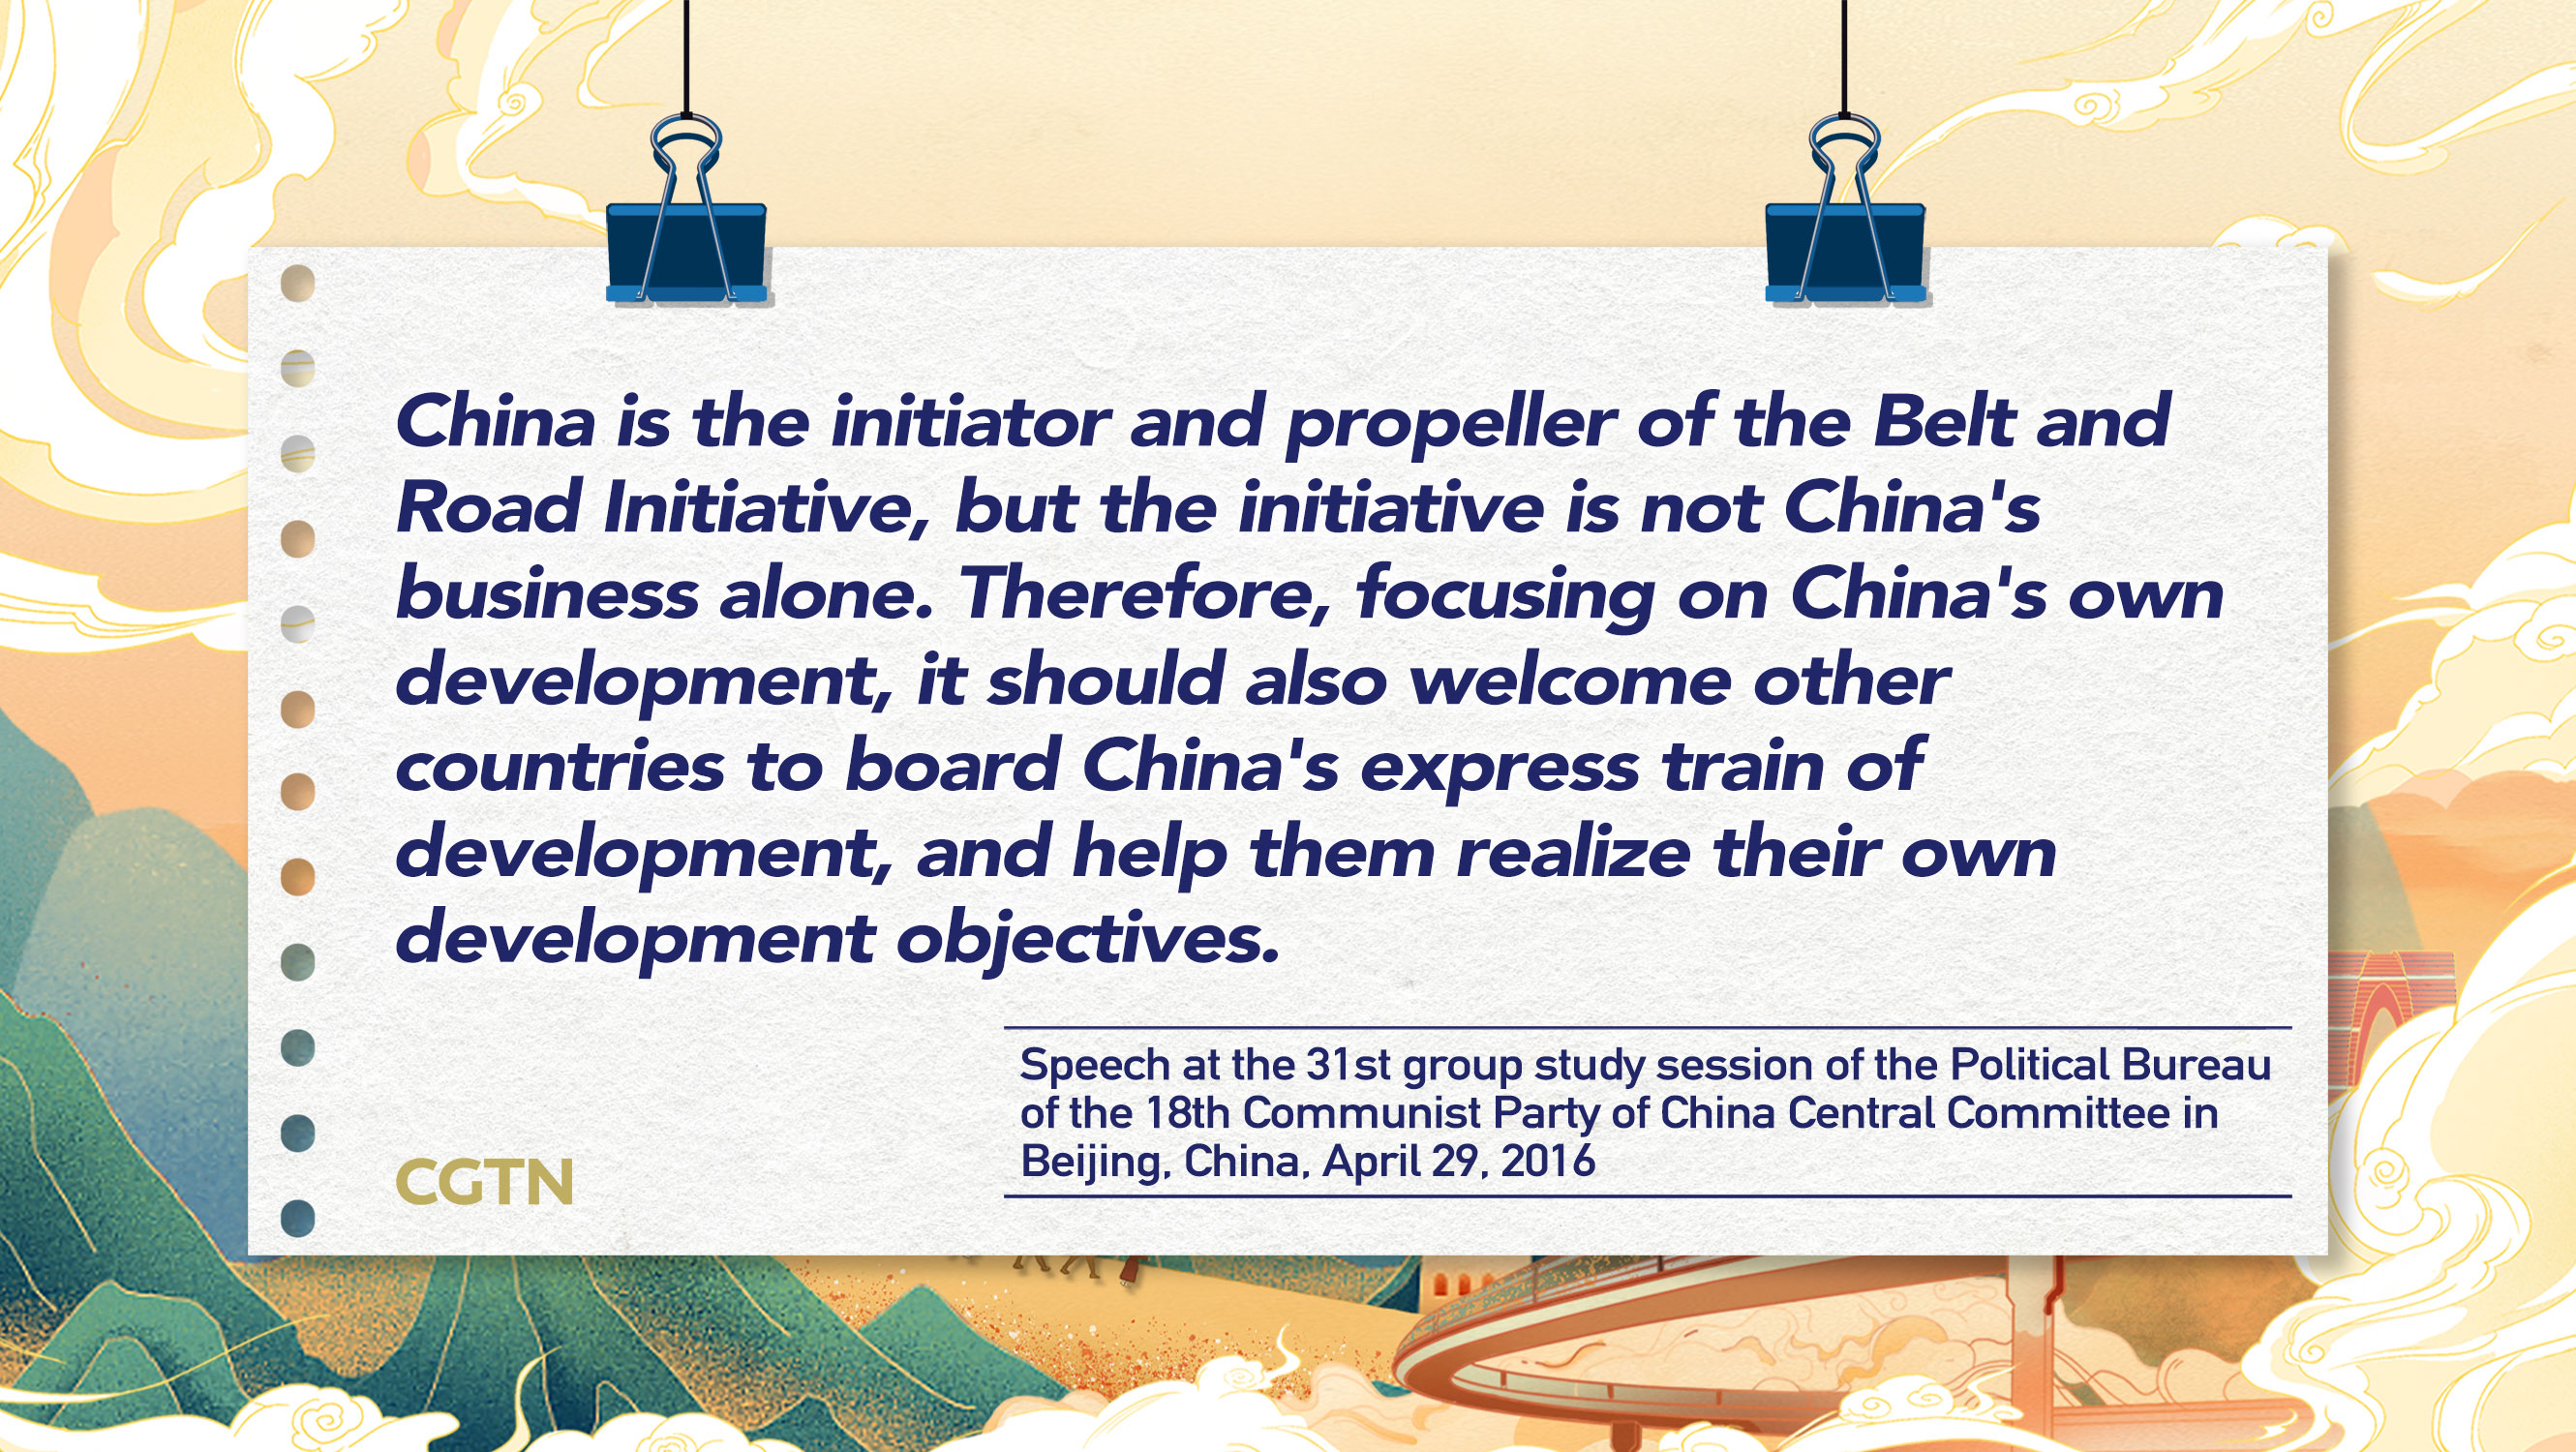 Xi Jinping's key quotes on Belt and Road Initiative